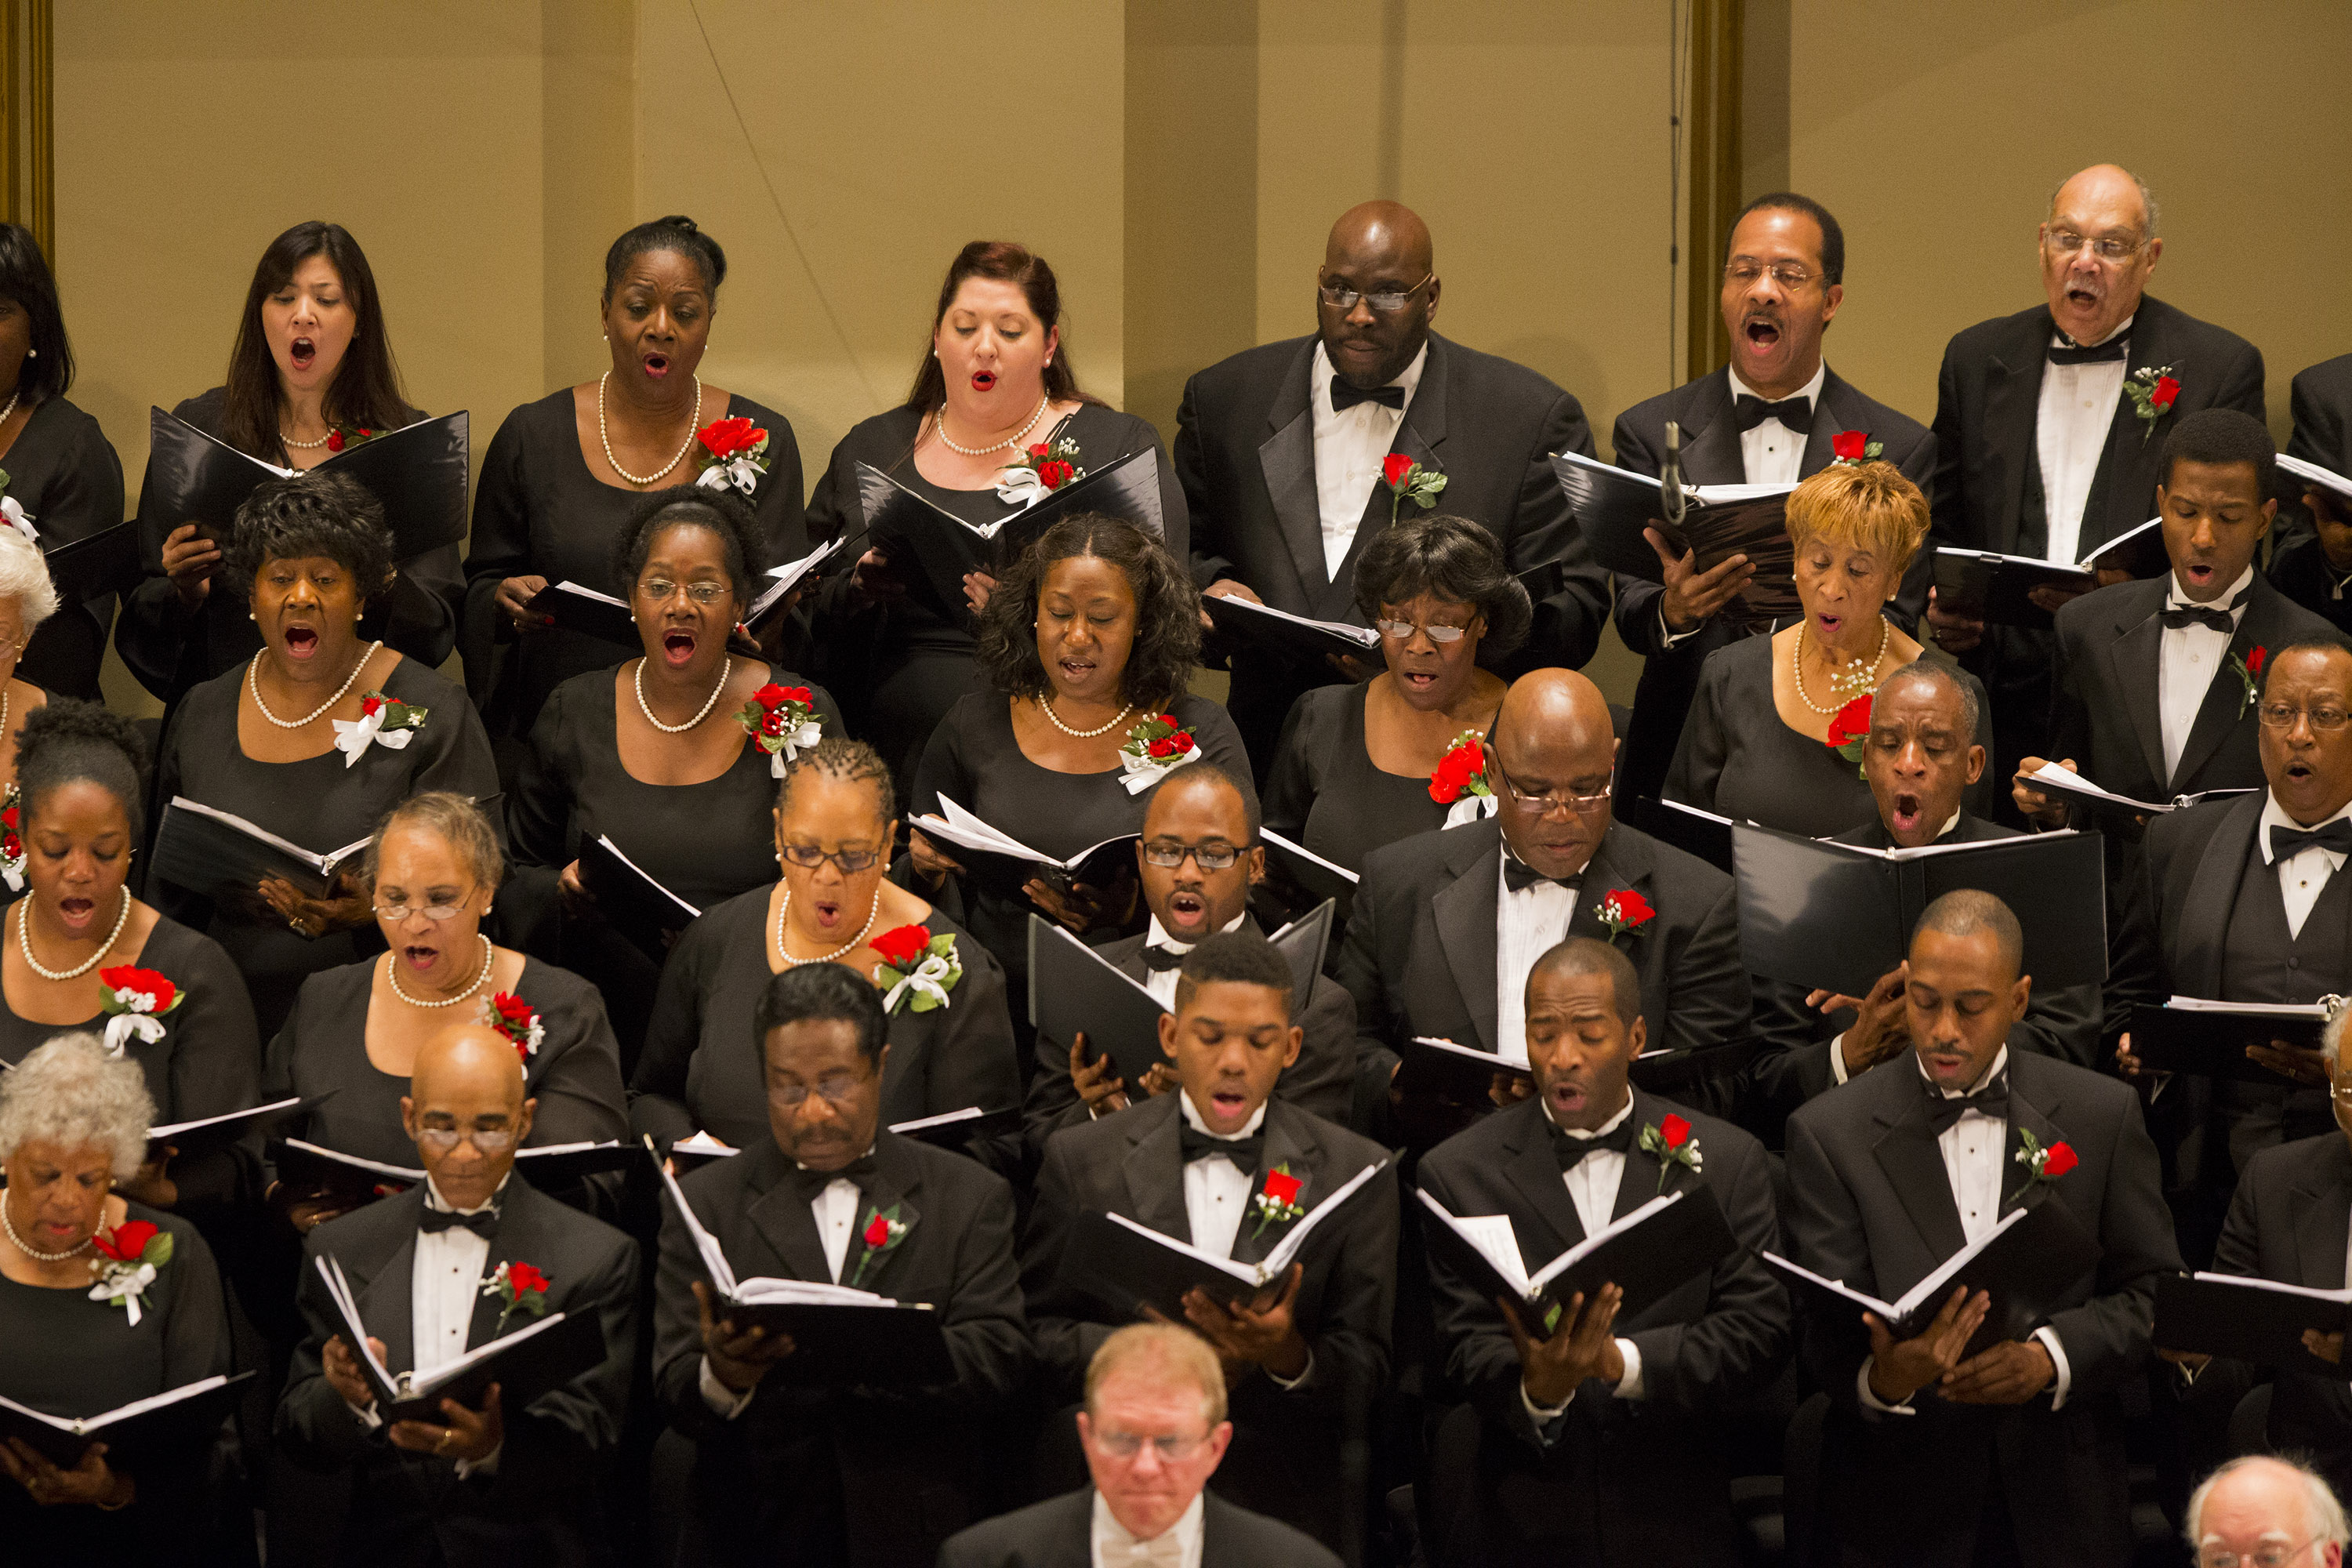 A Relevant Requiem in St. Louis | HuffPost